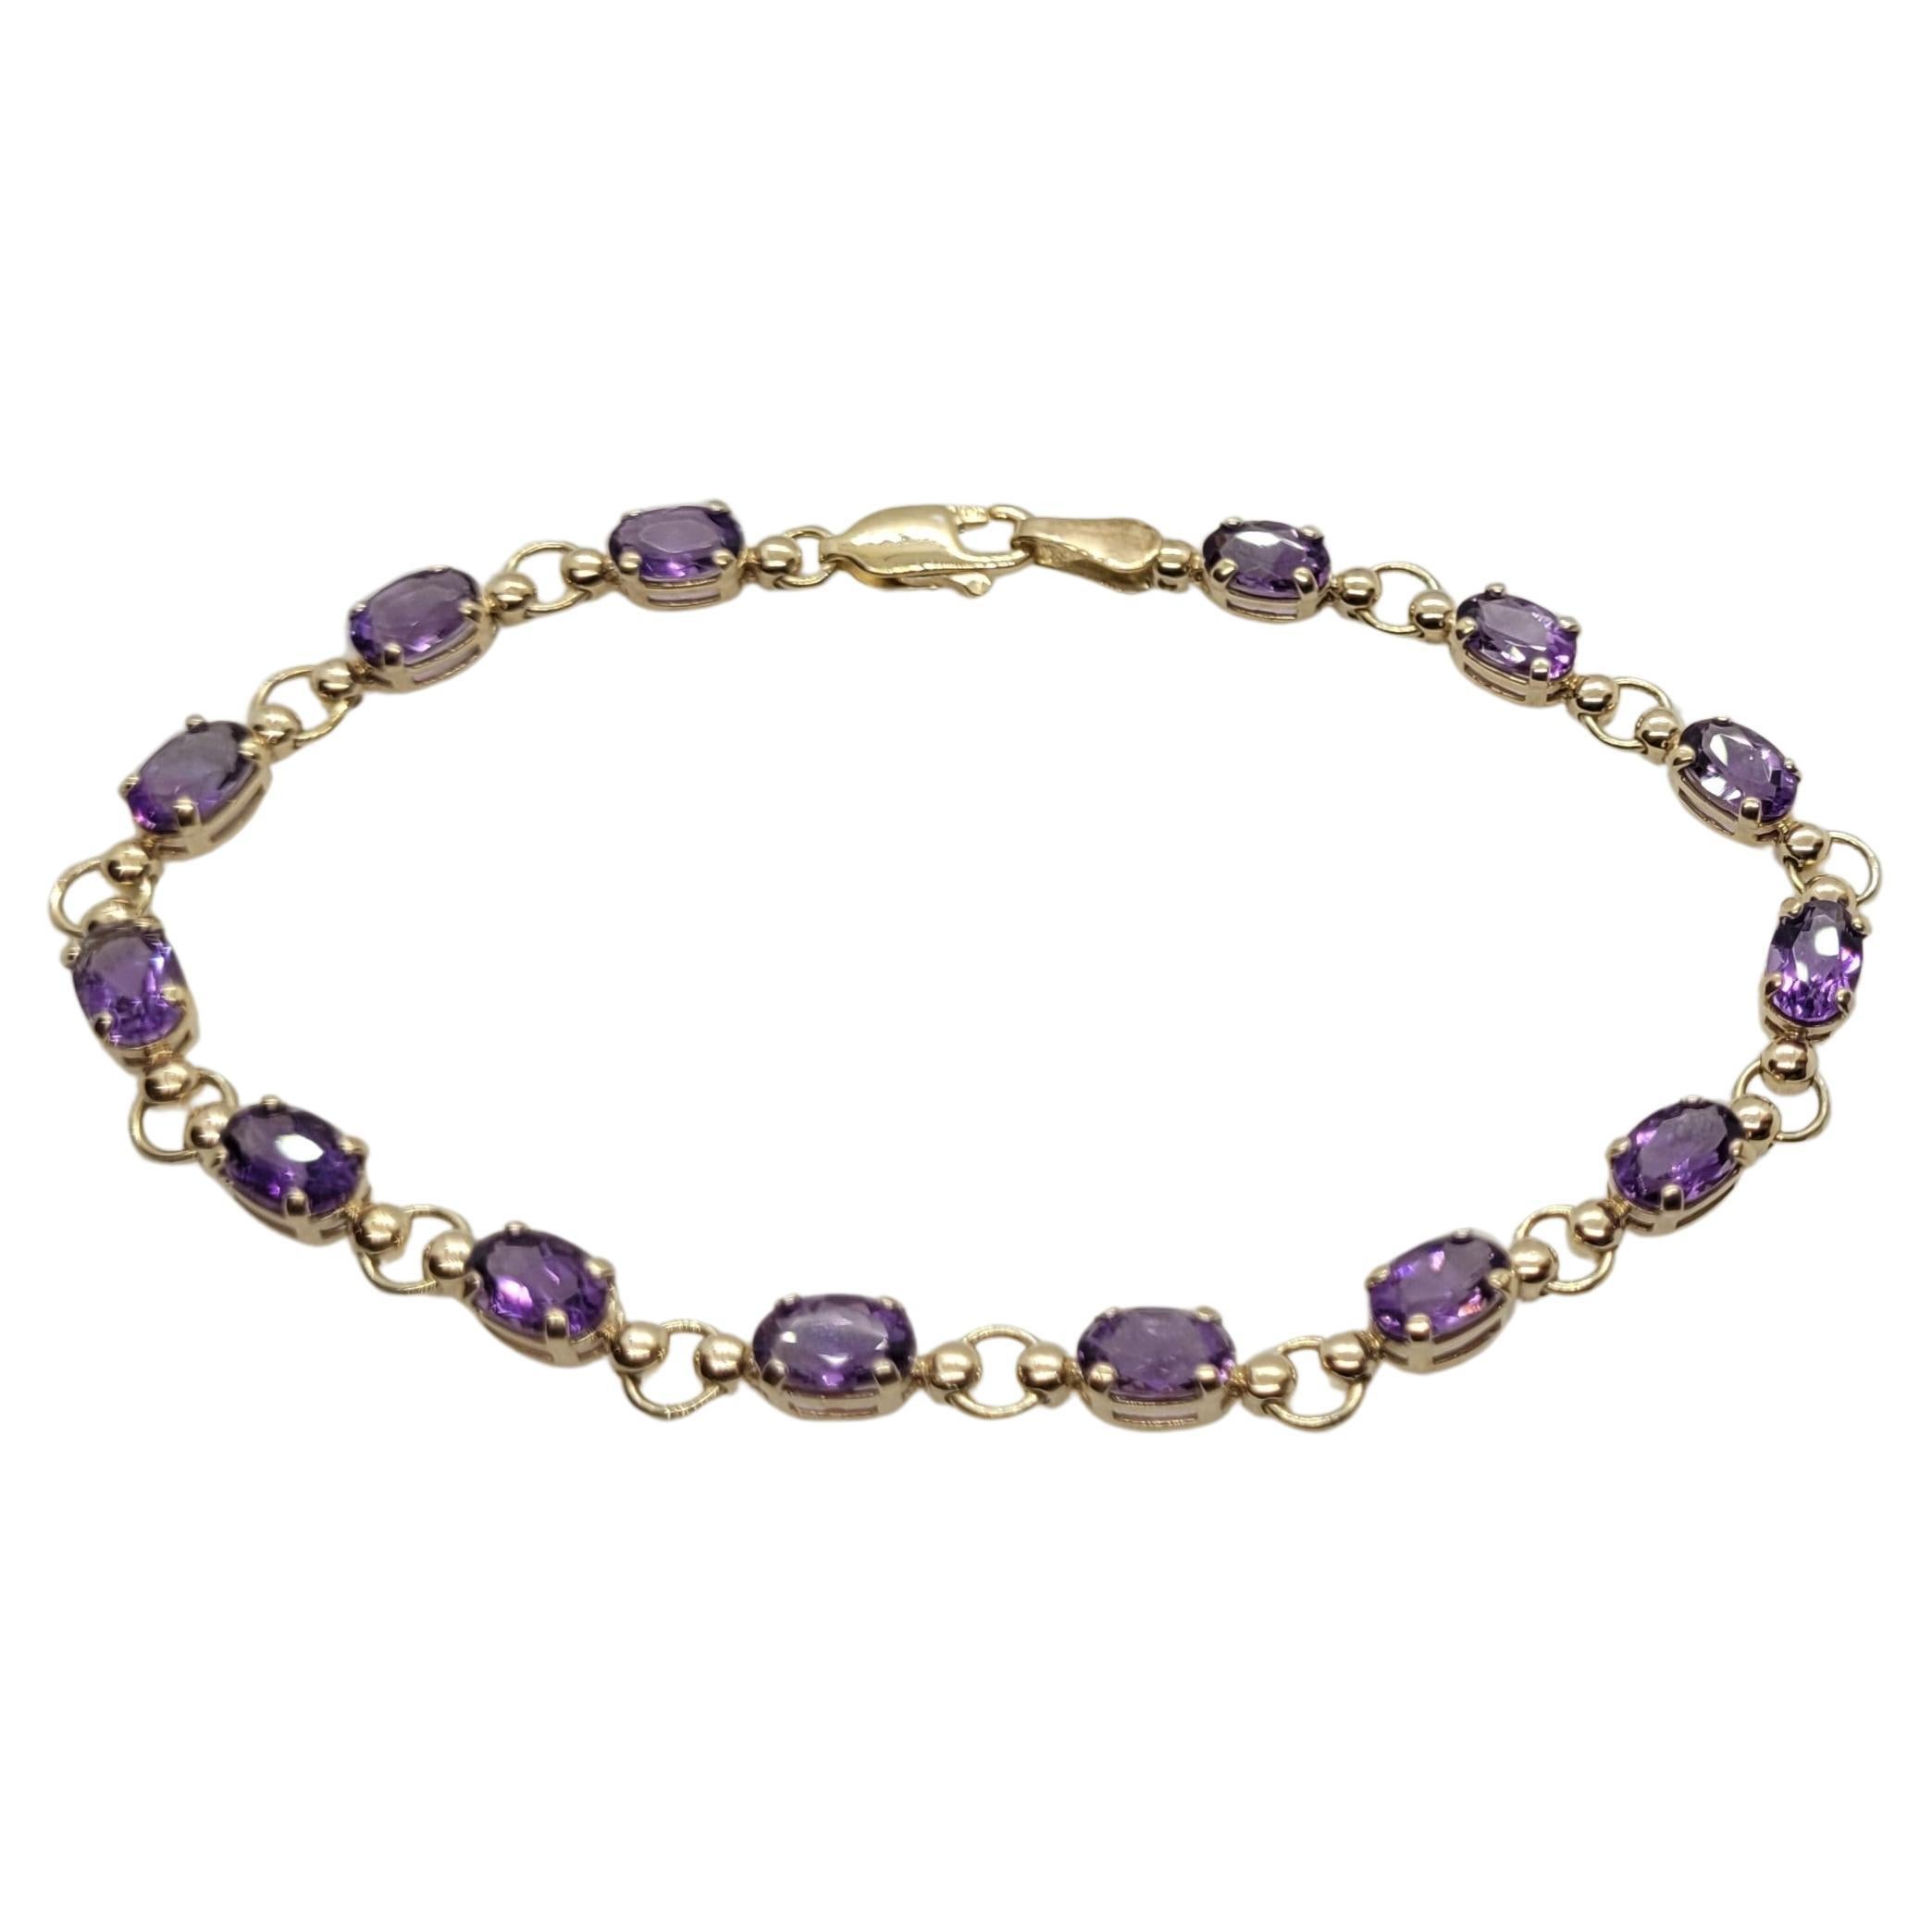 Yellow Gold Amethyst Bracelet, 6 x 4 mm Oval Amethyst, 10kt Gold, 7.25 Inches For Sale